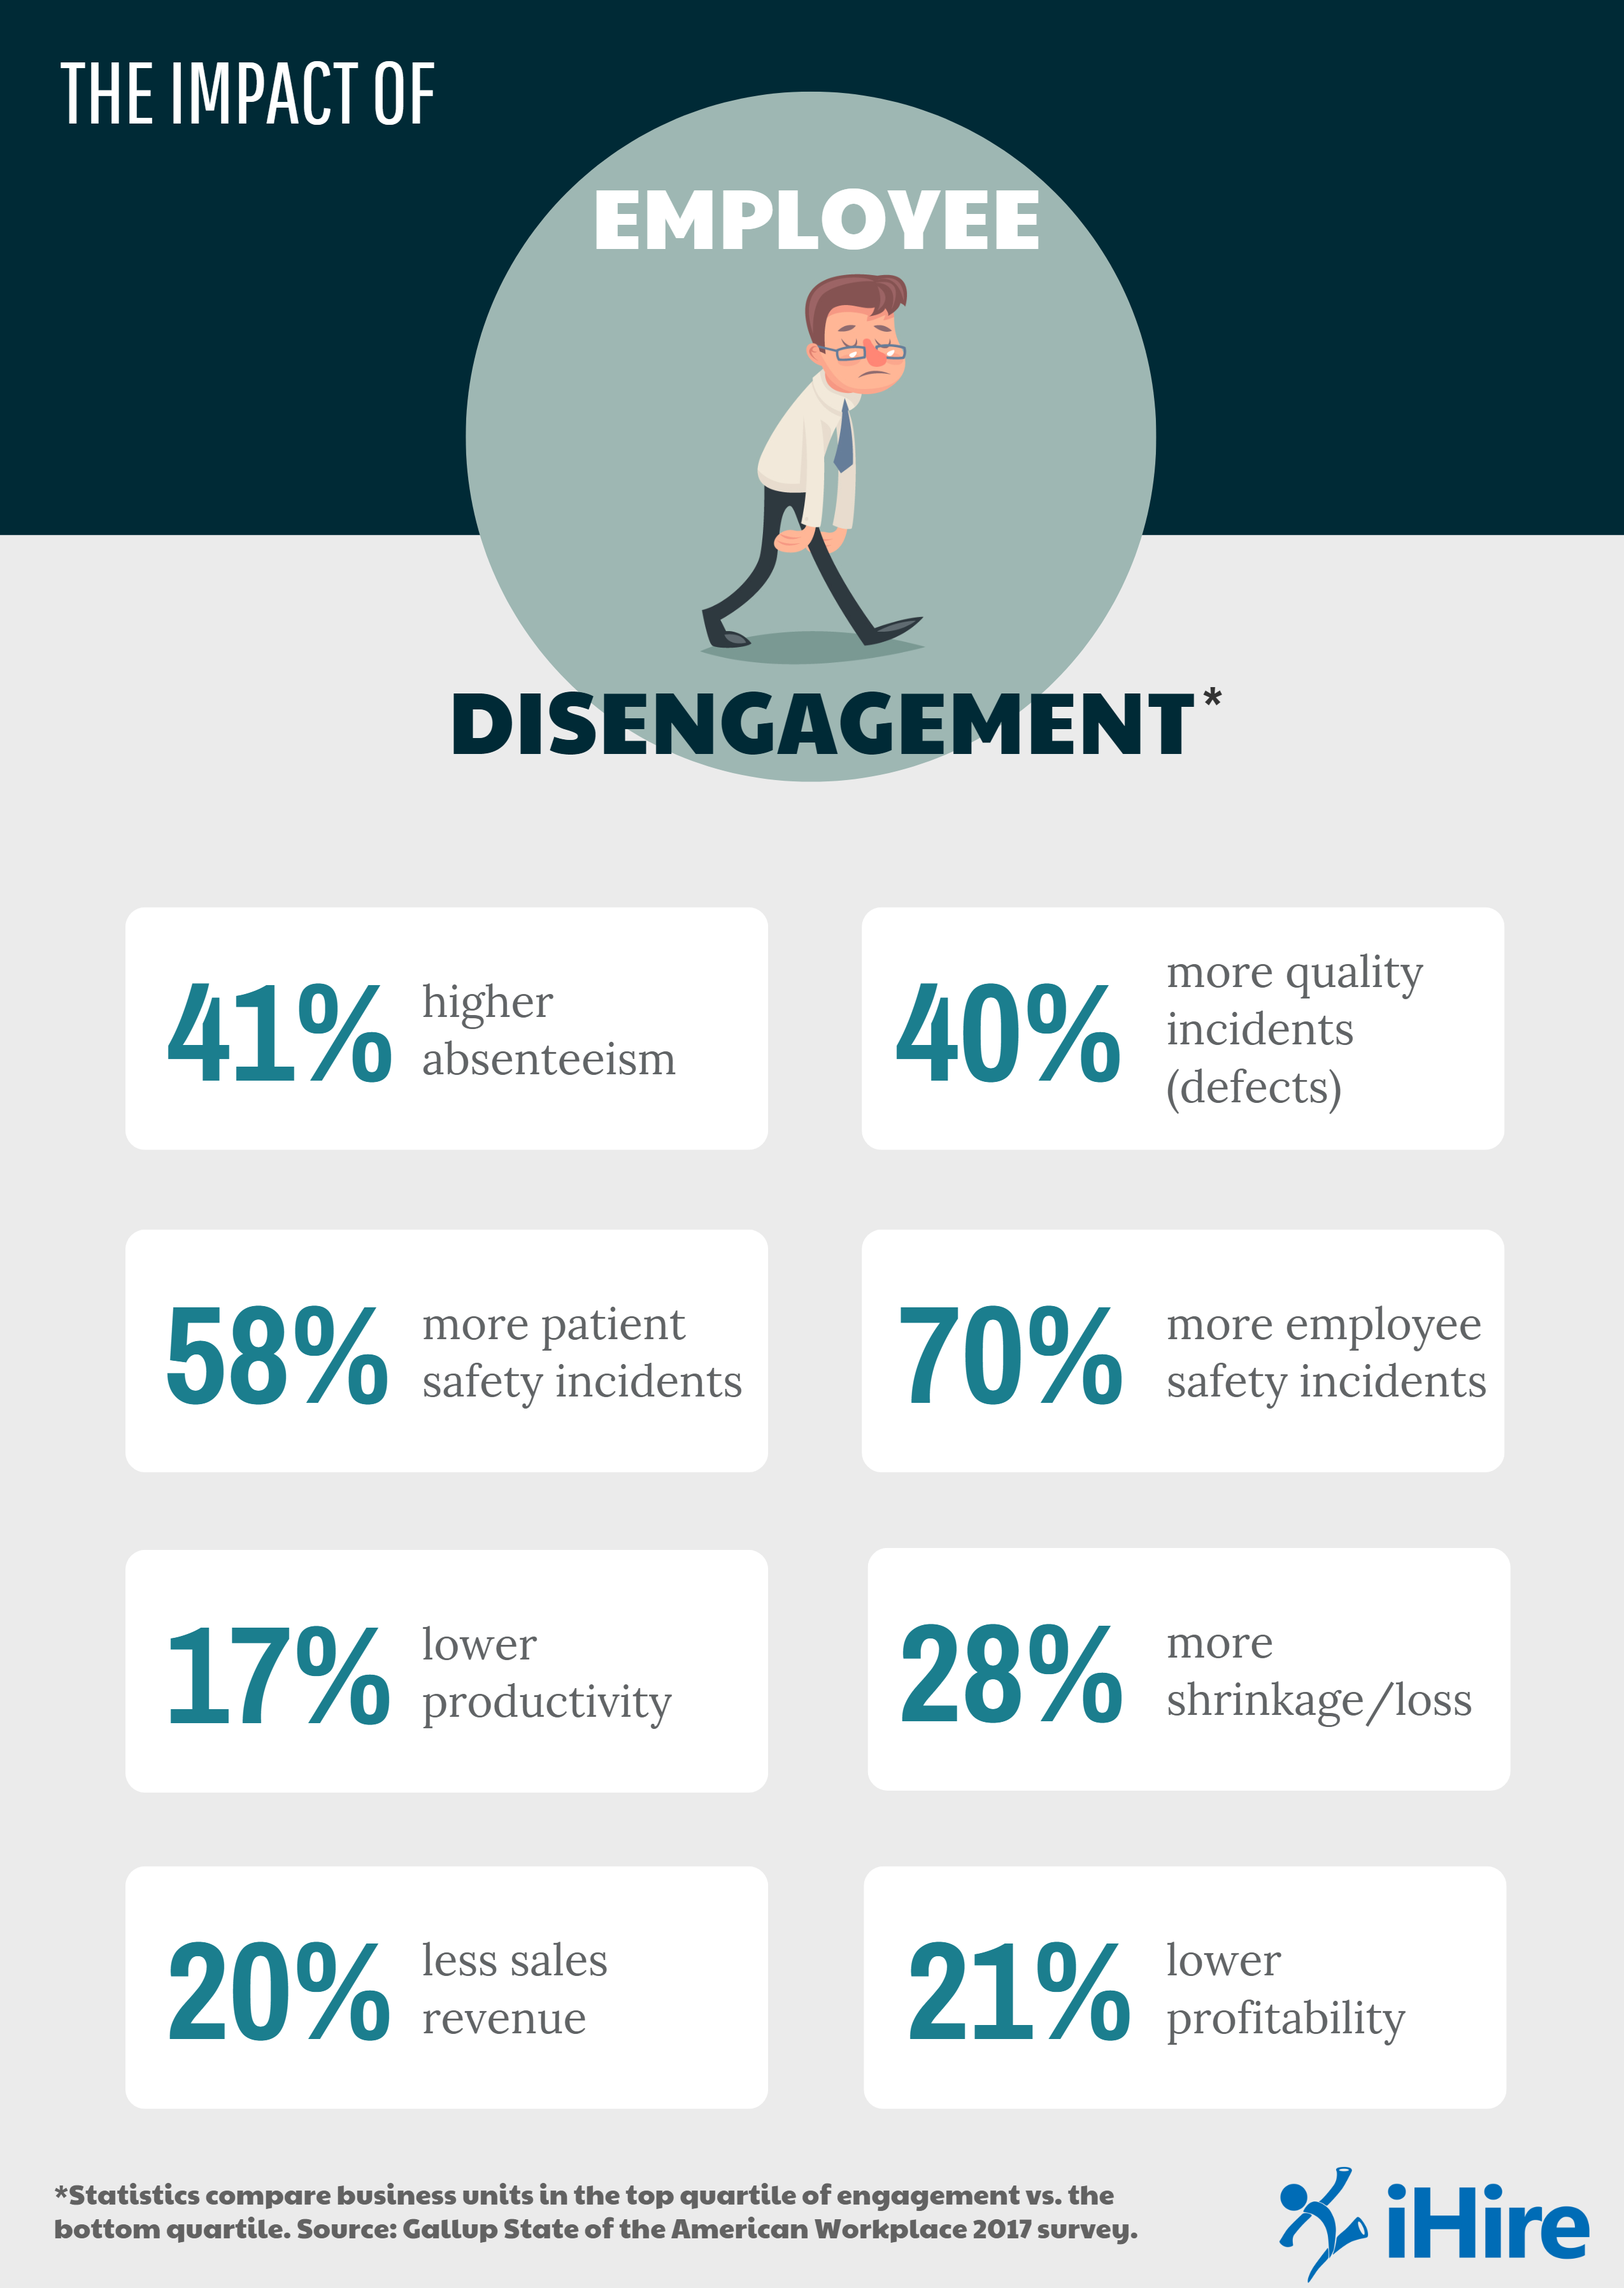 Employee disengagement has been linked to higher absenteeism, lower quality products, more safety incidents, and less sales, among other impacts.